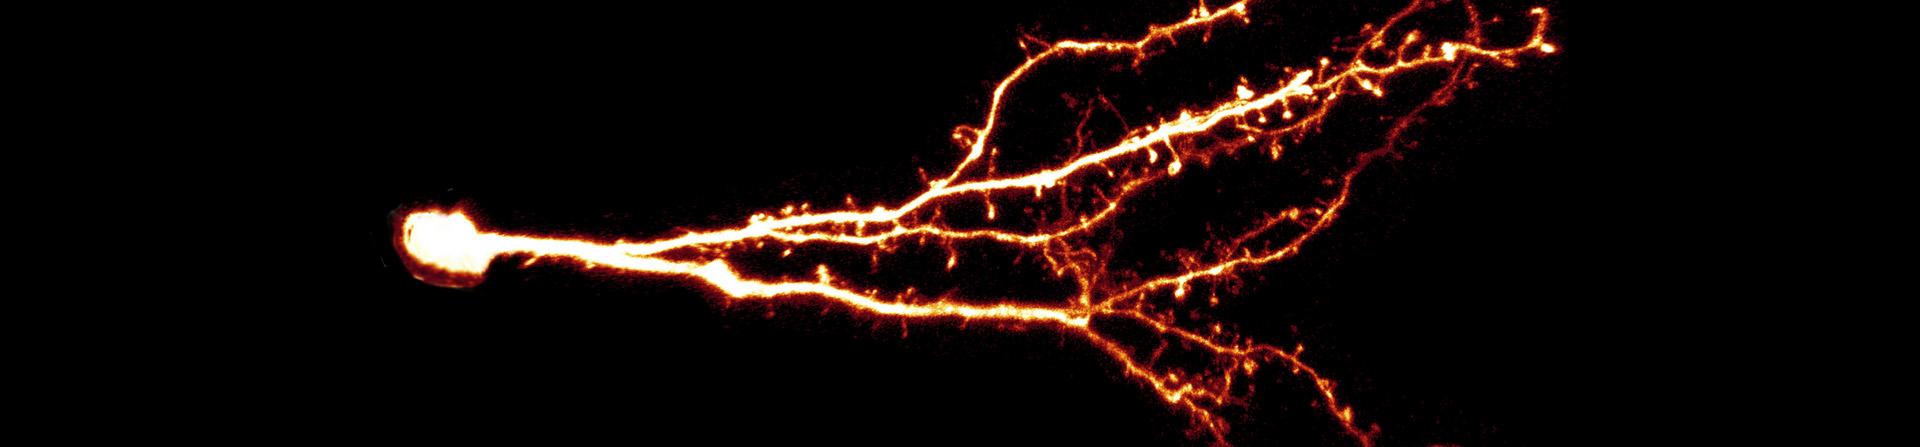 Adult-born neuron in the mouse olfactory bulb